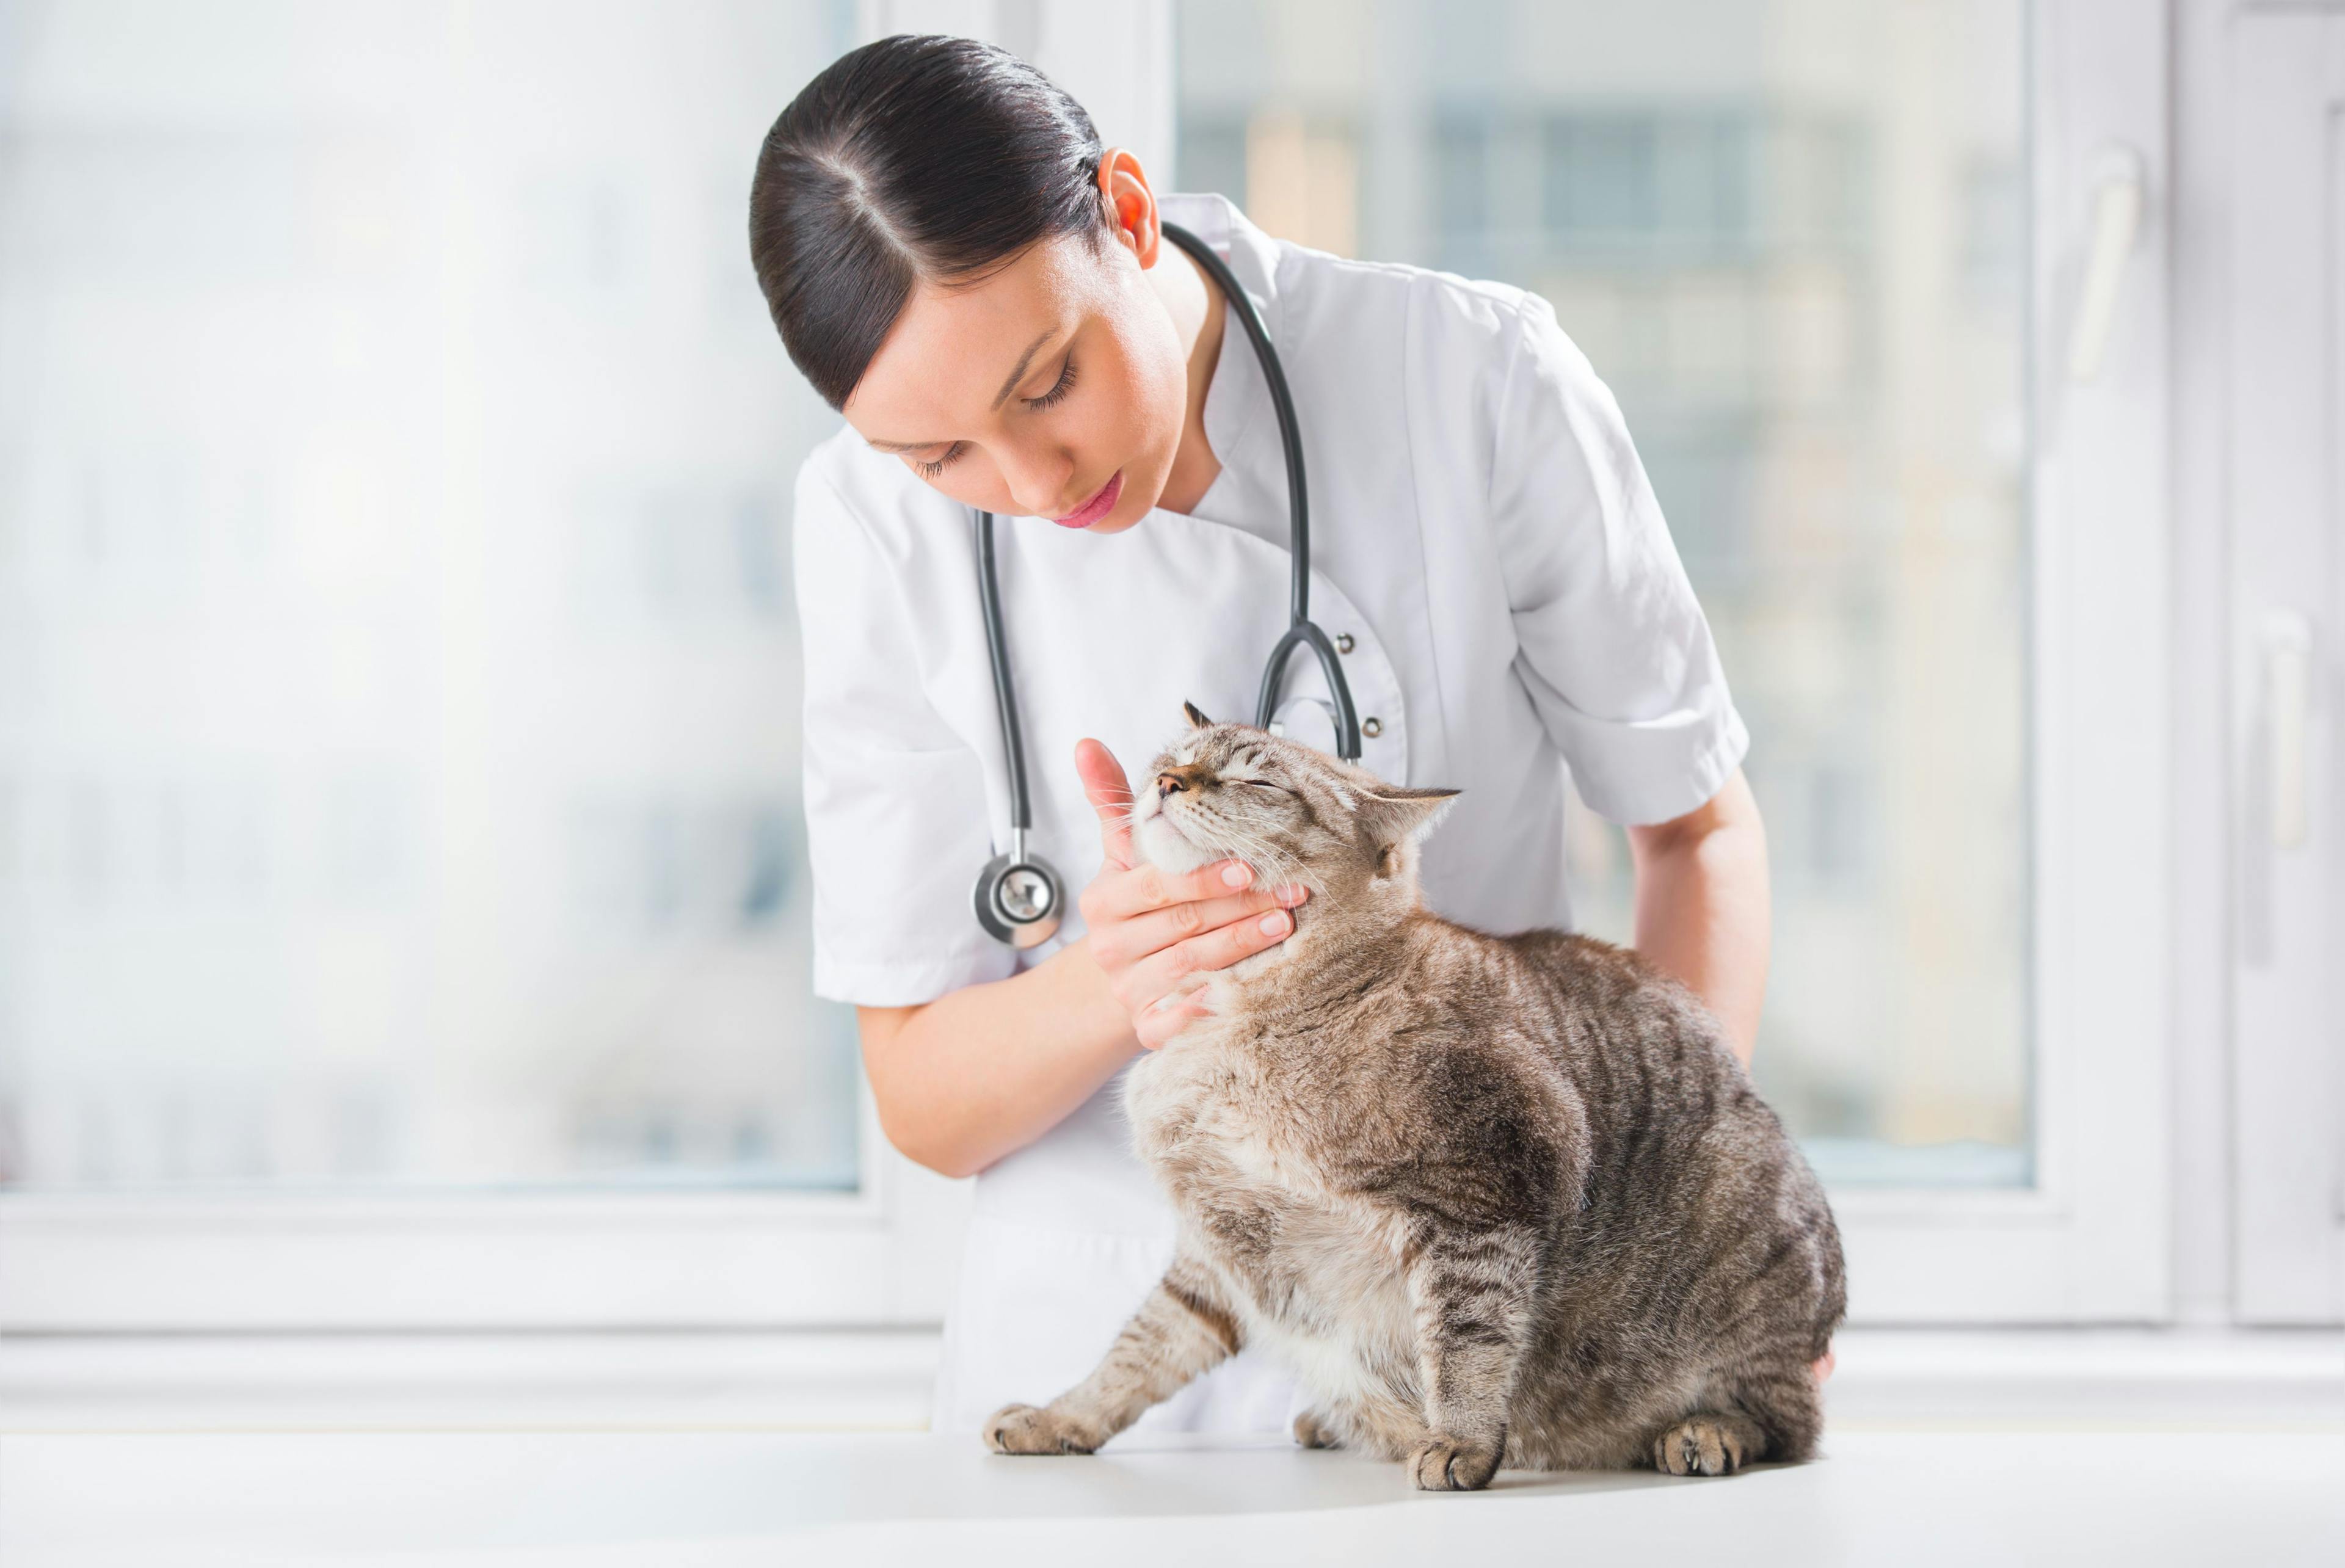 Relief veterinary work: What you need to know